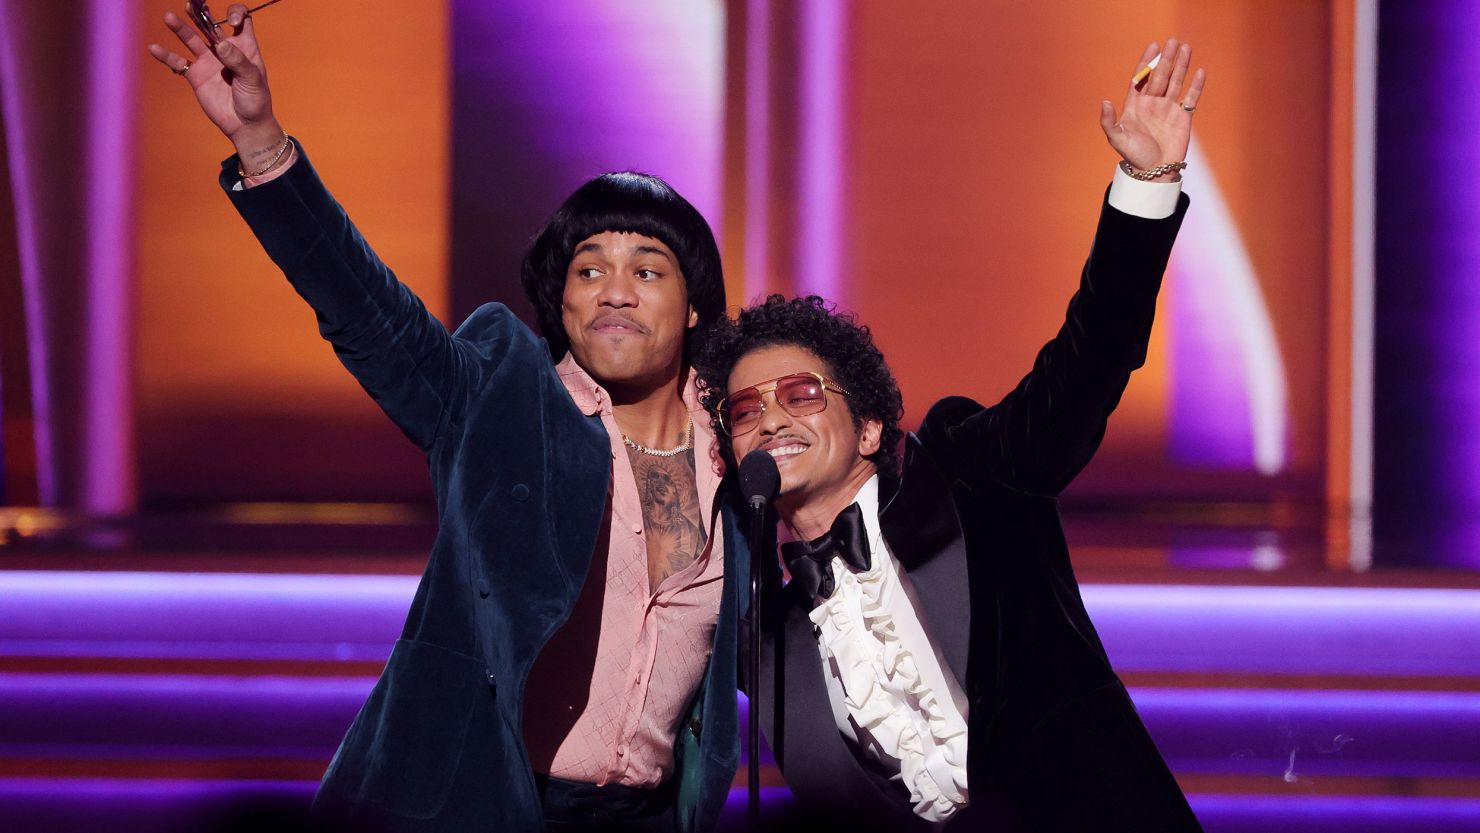 Anderson .Paak and Bruno Mars of Silk Sonic are among the artists scheduled to perform at the Billboard Music Awards.